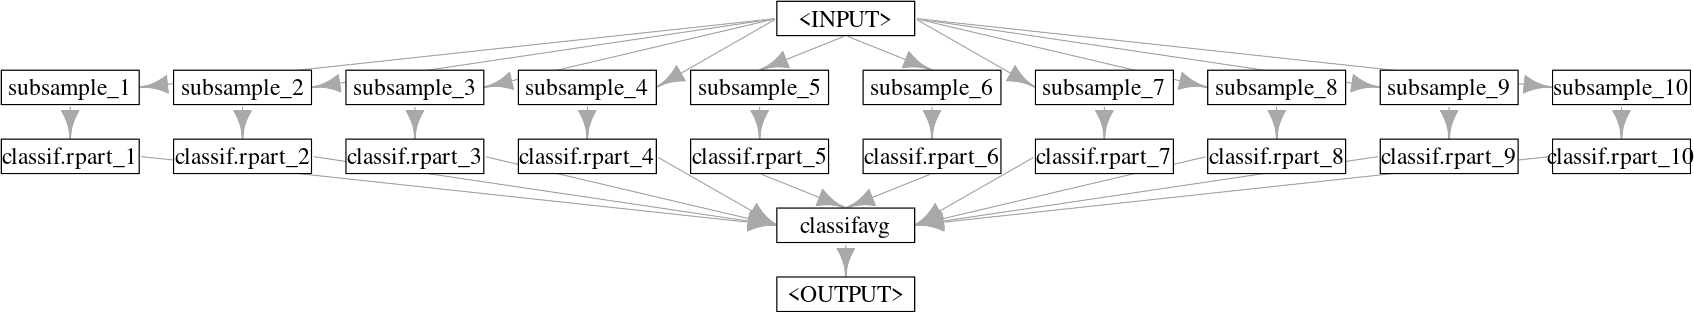 Parallel pipeline showing "<INPUT>" pointing to ten PipeOps "subsample_1",...,"subsample_10" that each separately point to "classif.rpart_1",...,"classif.rpart_10" respectively, which all point to the same "classifavg -> <OUTPUT>".